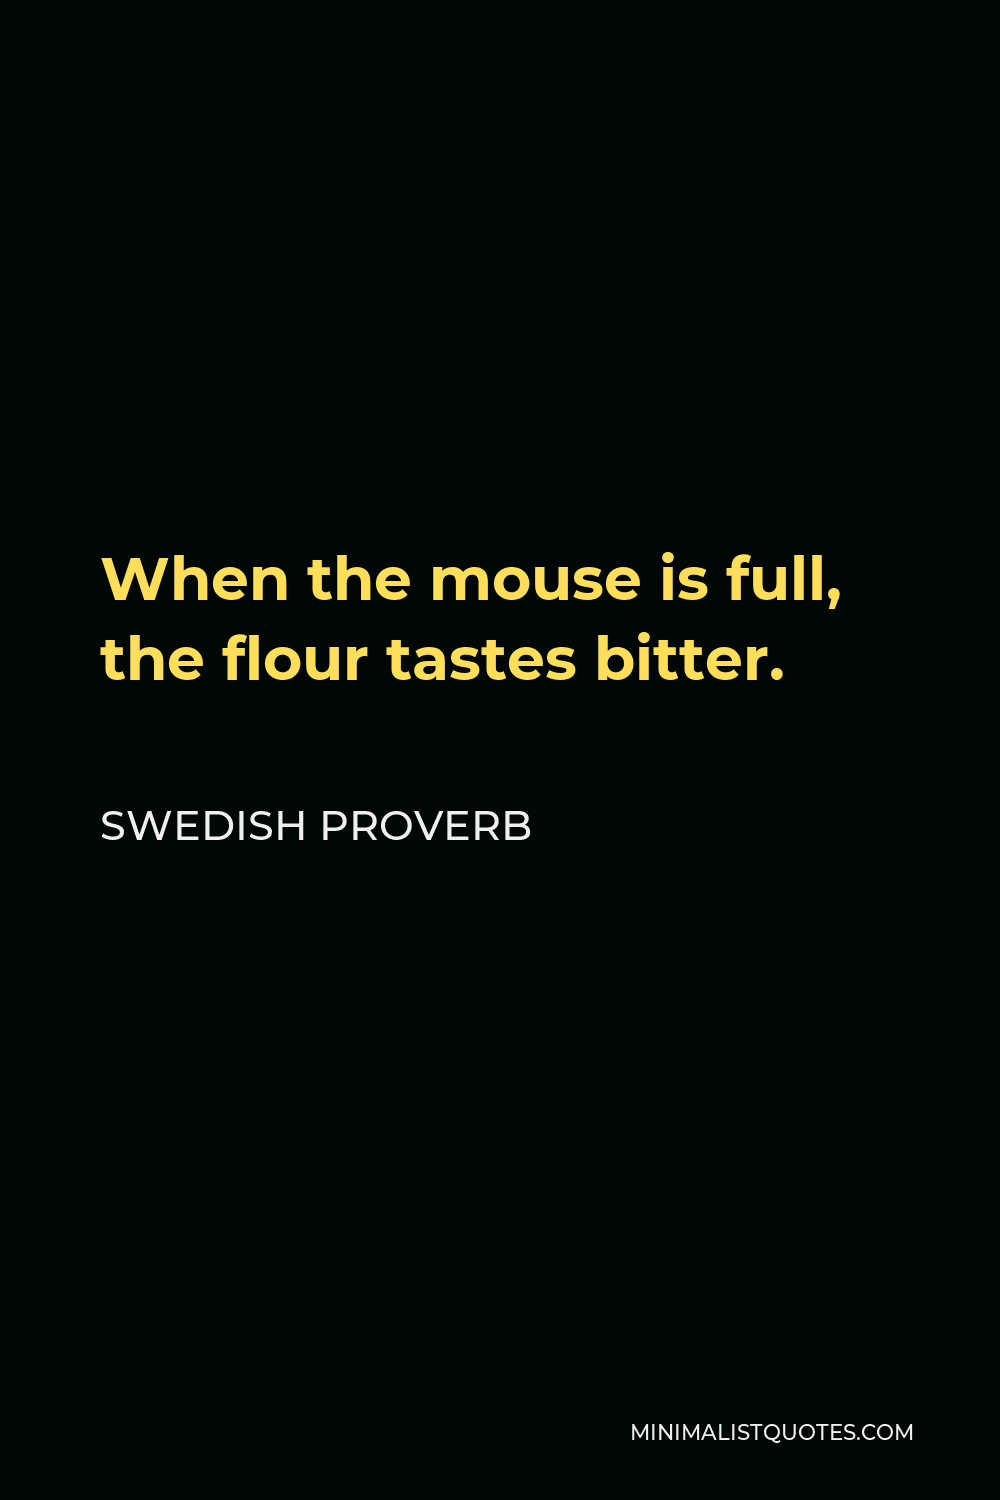 Swedish Proverb Quote - When the mouse is full, the flour tastes bitter.